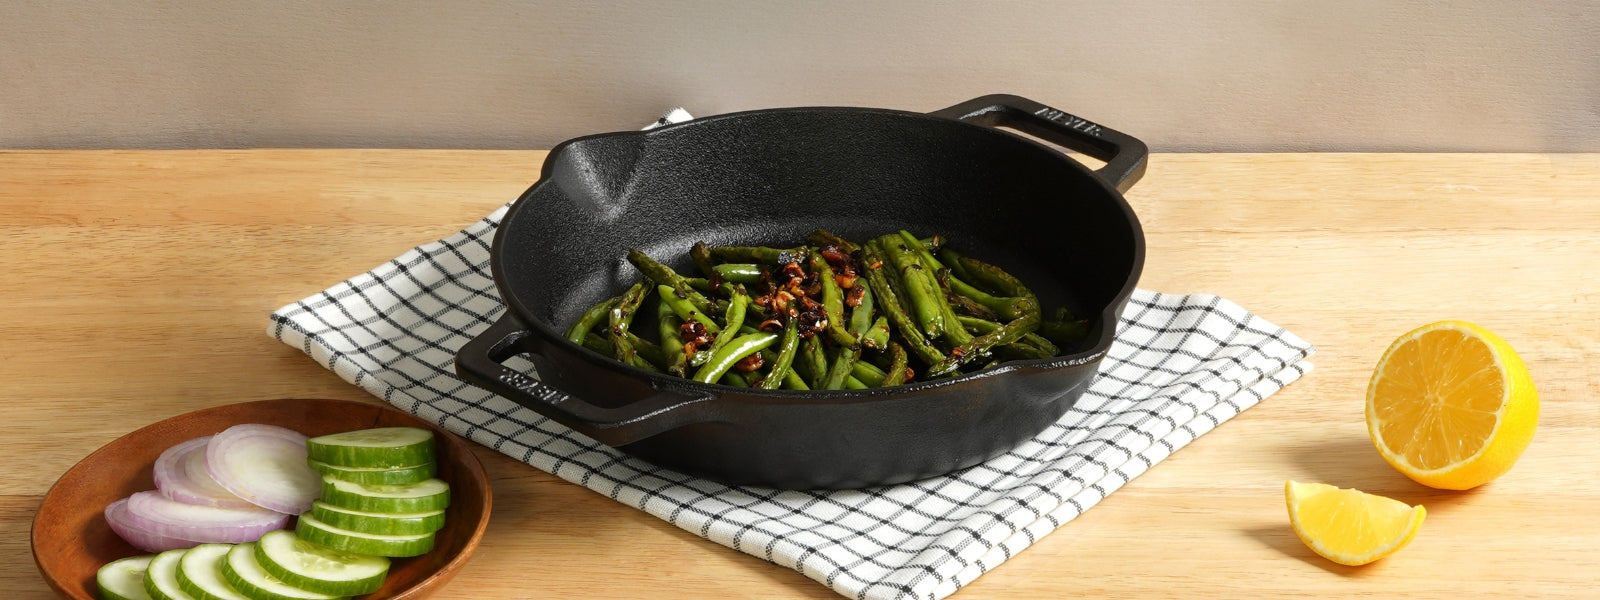 What is the best way to clean cast iron cookware? - PotsandPans India